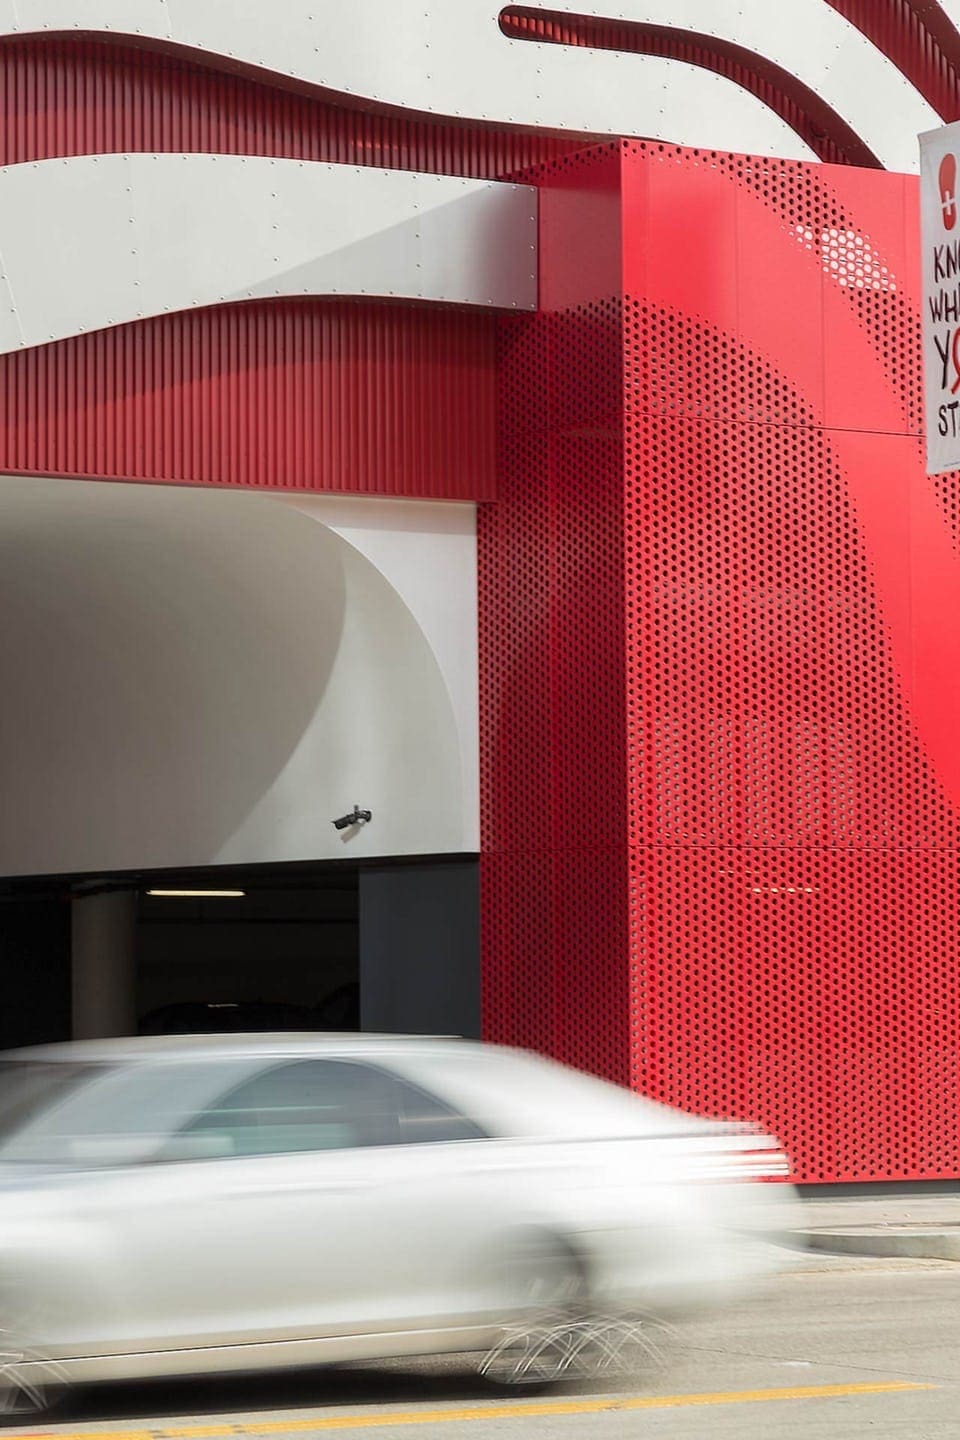 ZAHNER ASSIST ENSURES QUALITY SYSTEMS AT PREDICTABLE COSTS. PICTURED: PETERSEN AUTOMOTIVE MUSEUM